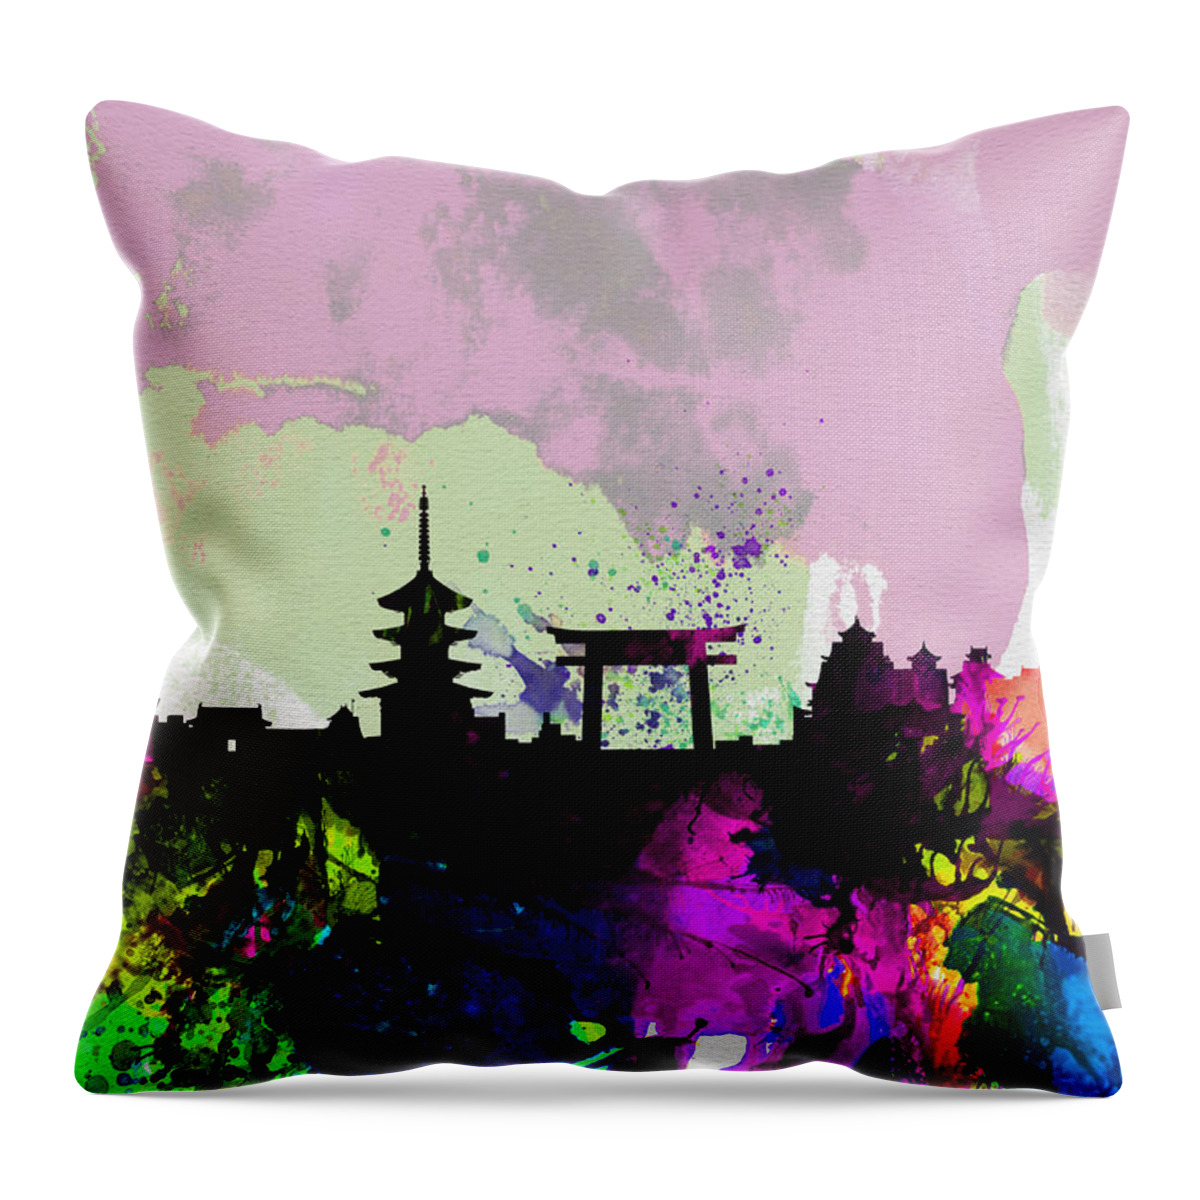 Kyoto Throw Pillow featuring the painting Kyoto Watercolor Skyline by Naxart Studio